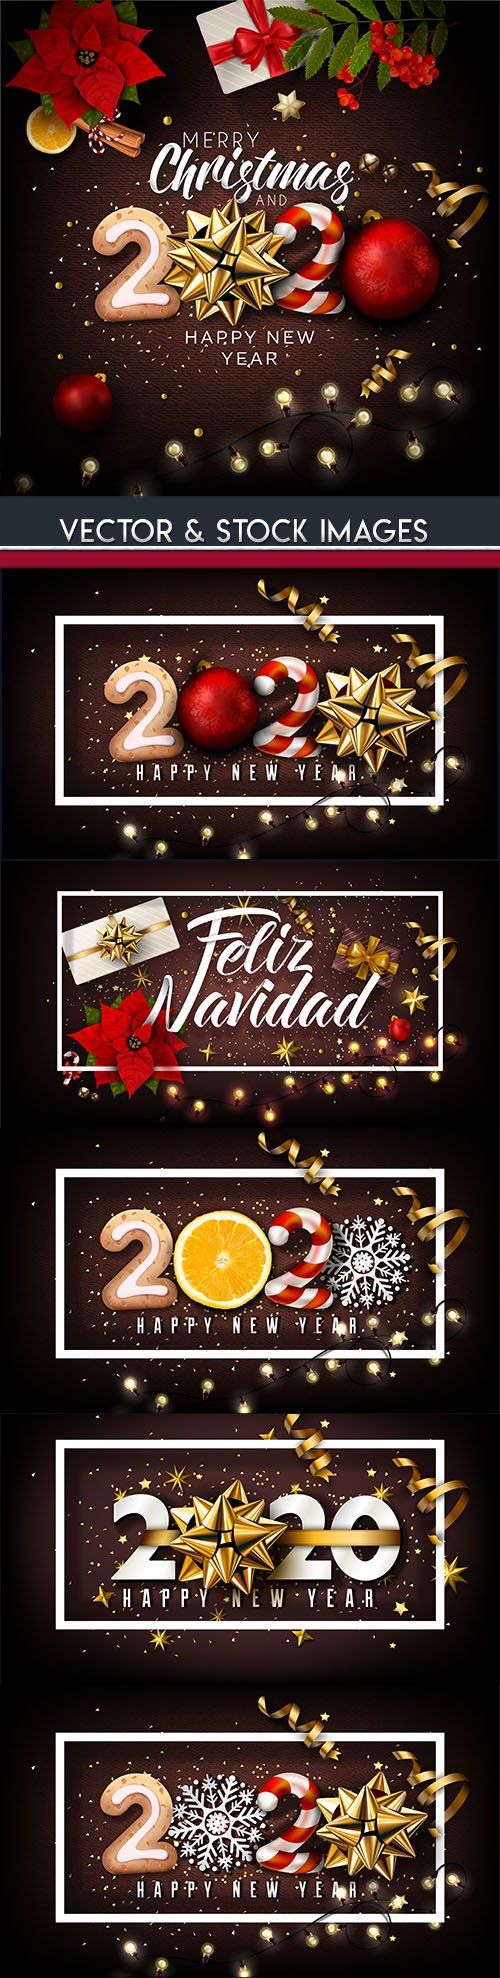 New Year and Christmas decorative 2020 illustration 13